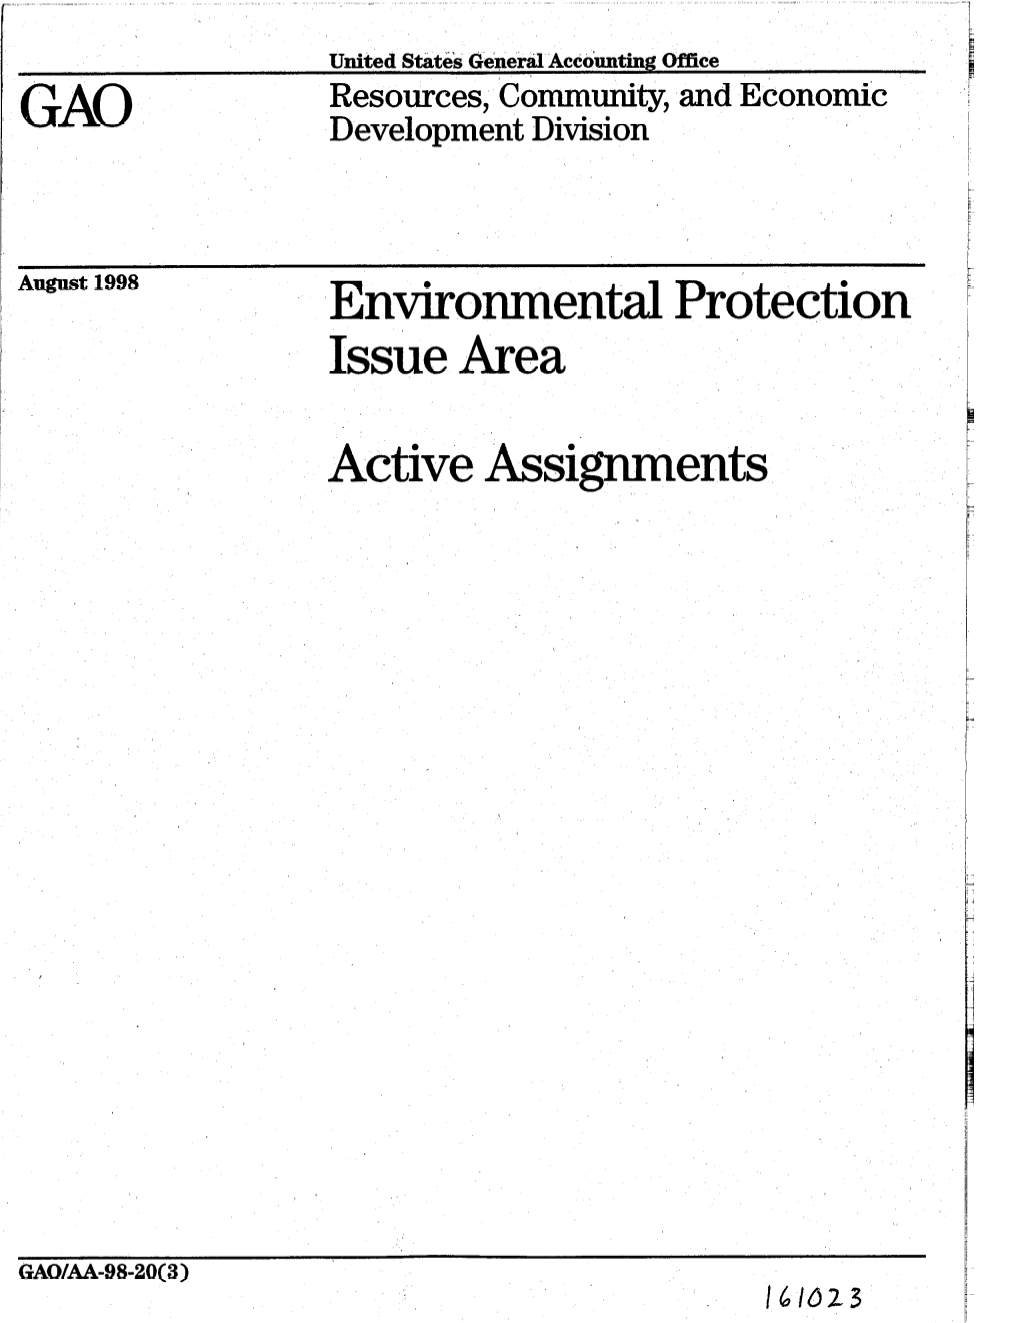 Environmental Protection Issue Area ‘